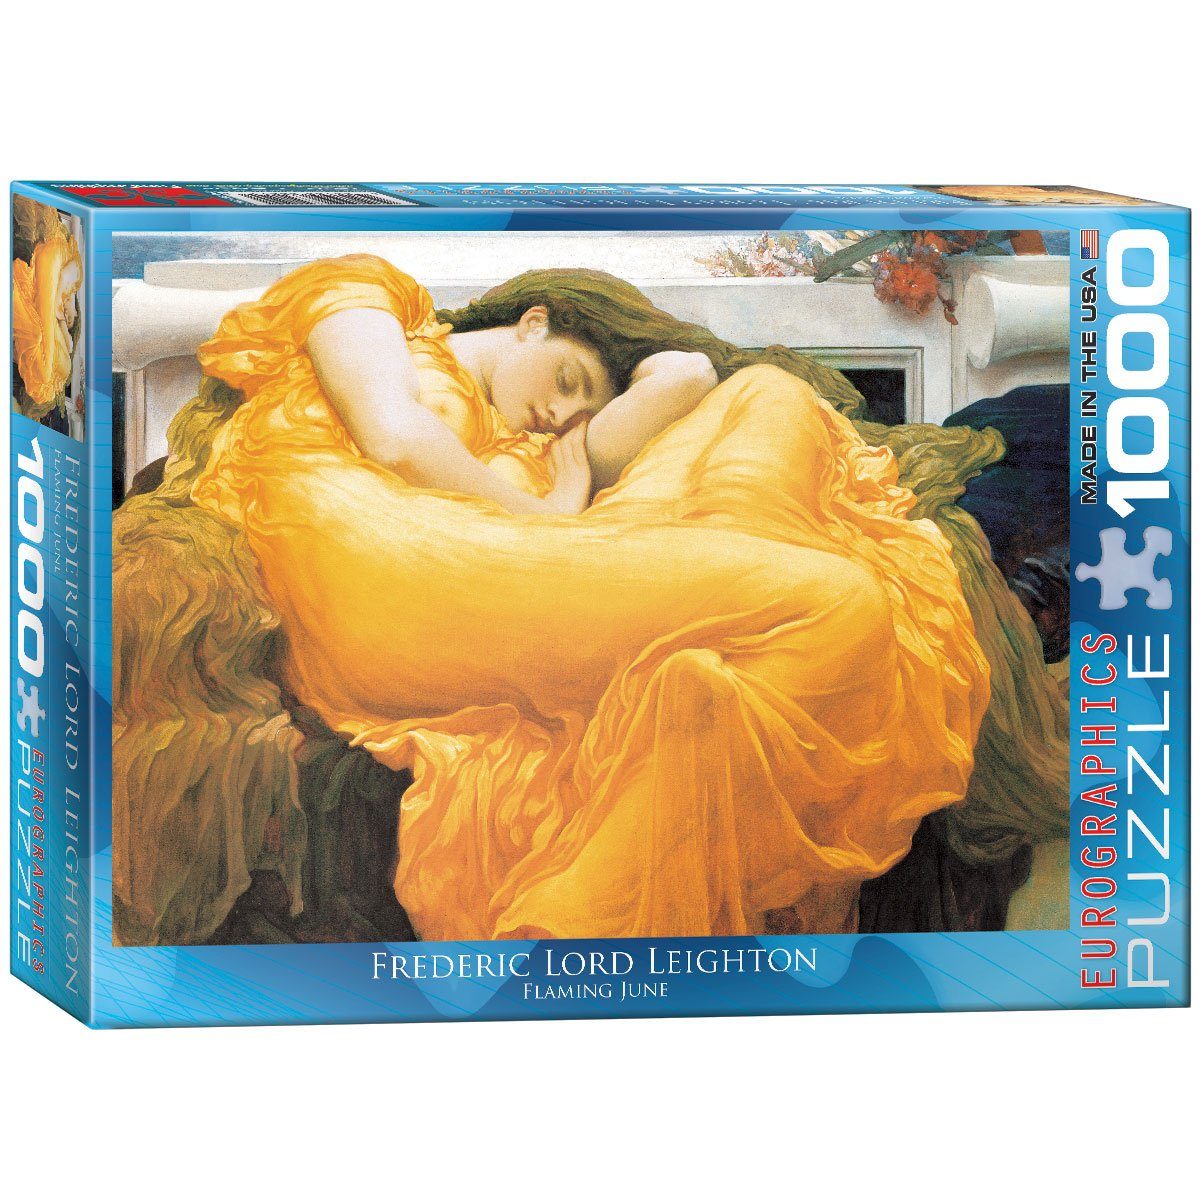 June Puzzle Puzzleteile Lord EuroGraphics 1000 Flaming Leighton, 6000-3214 EUROGRAPHICS